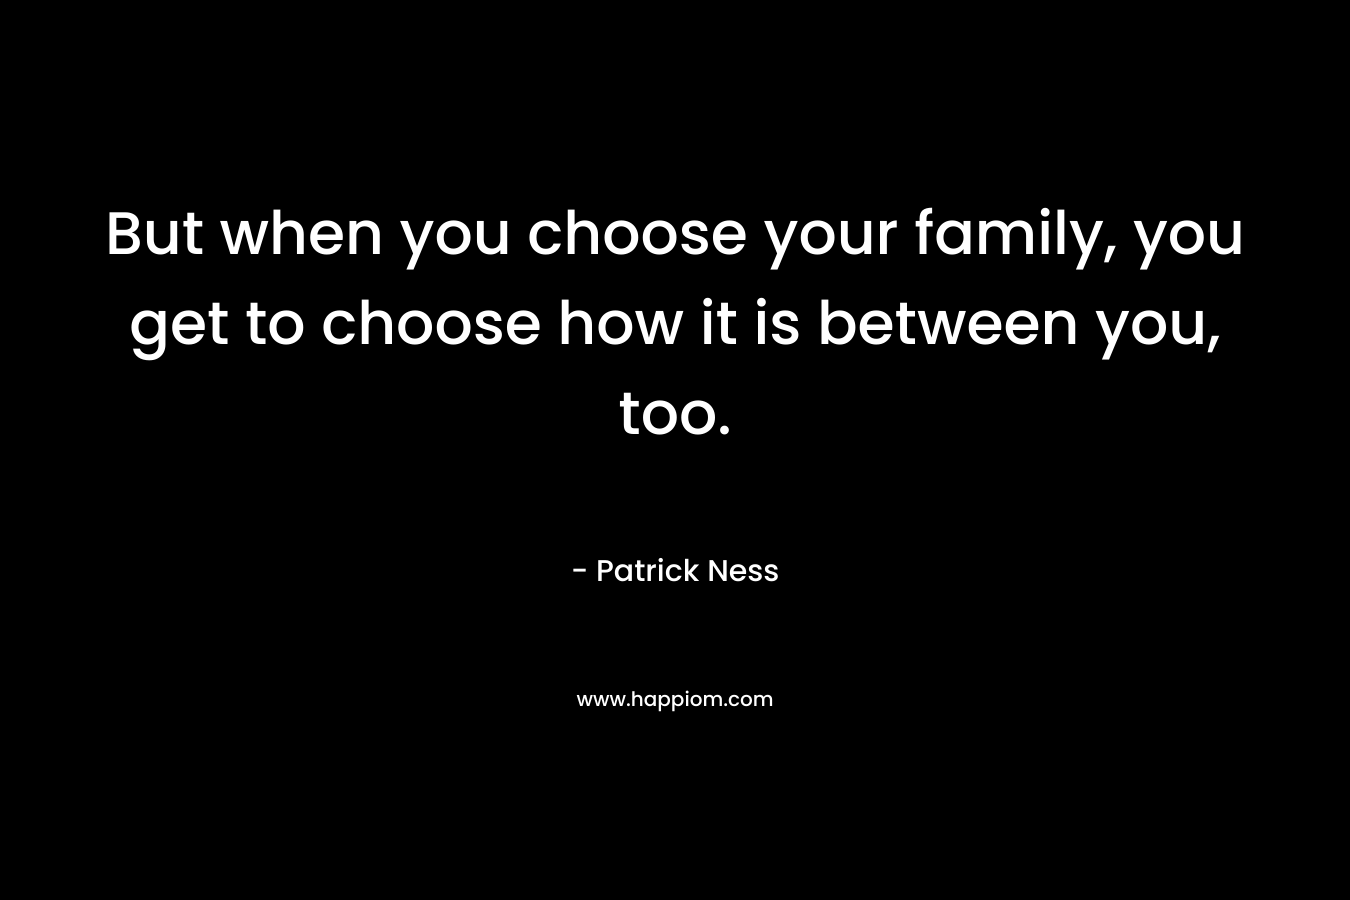 But when you choose your family, you get to choose how it is between you, too.